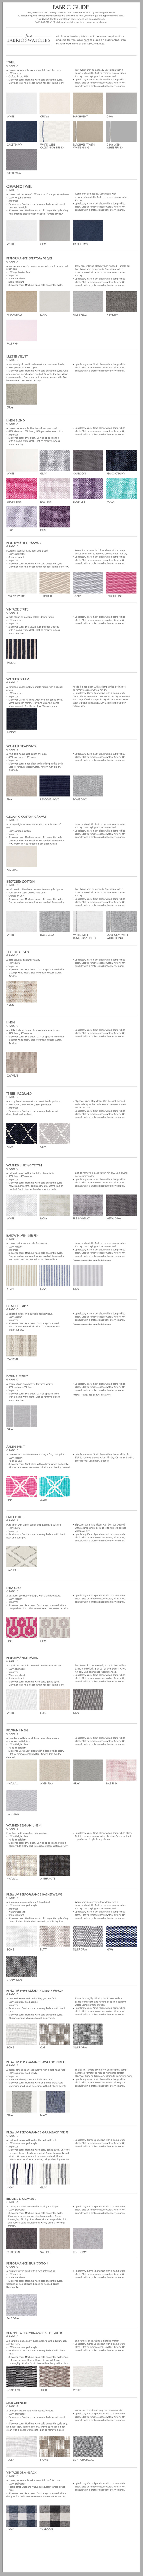 Fabric Guide